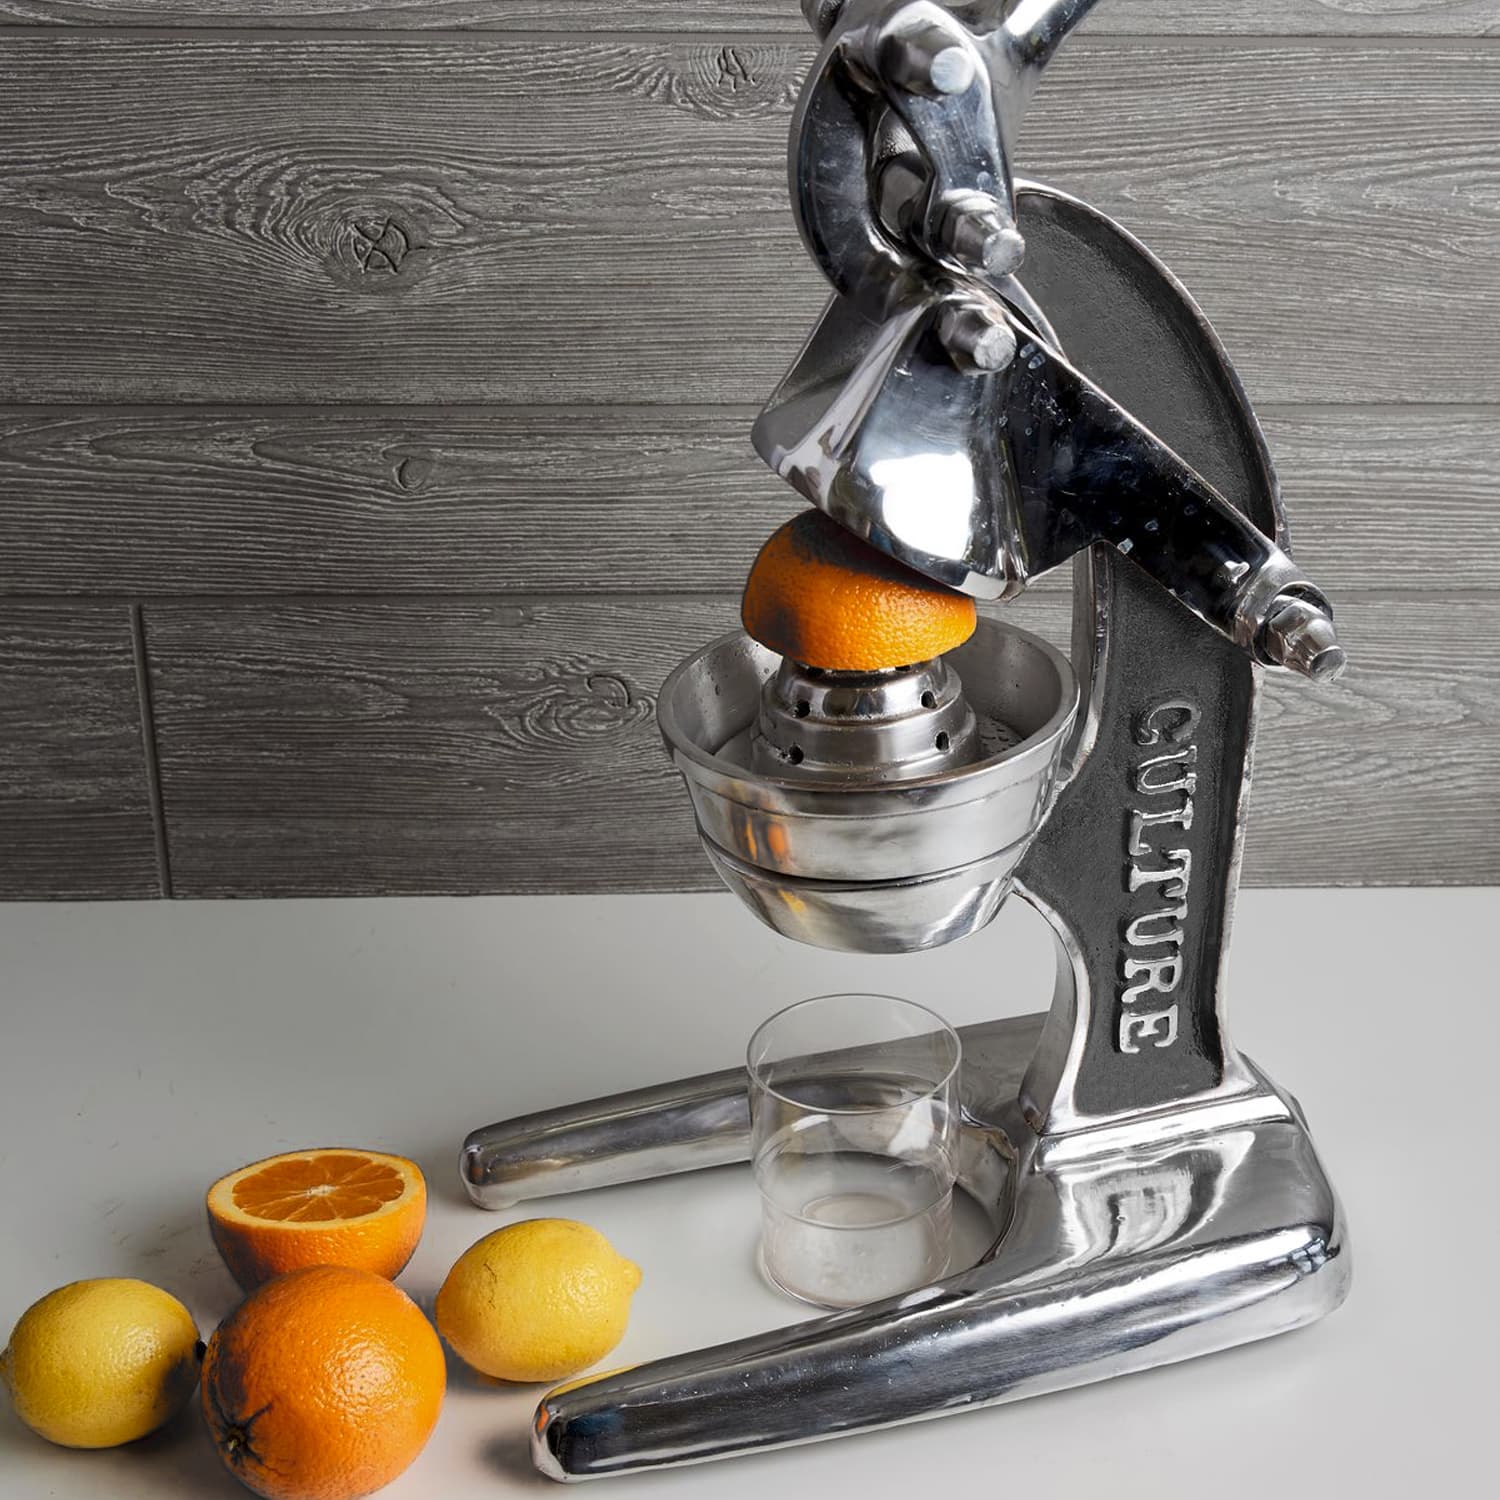 Artisan Citrus Hand Juicer - Large - From Mexico